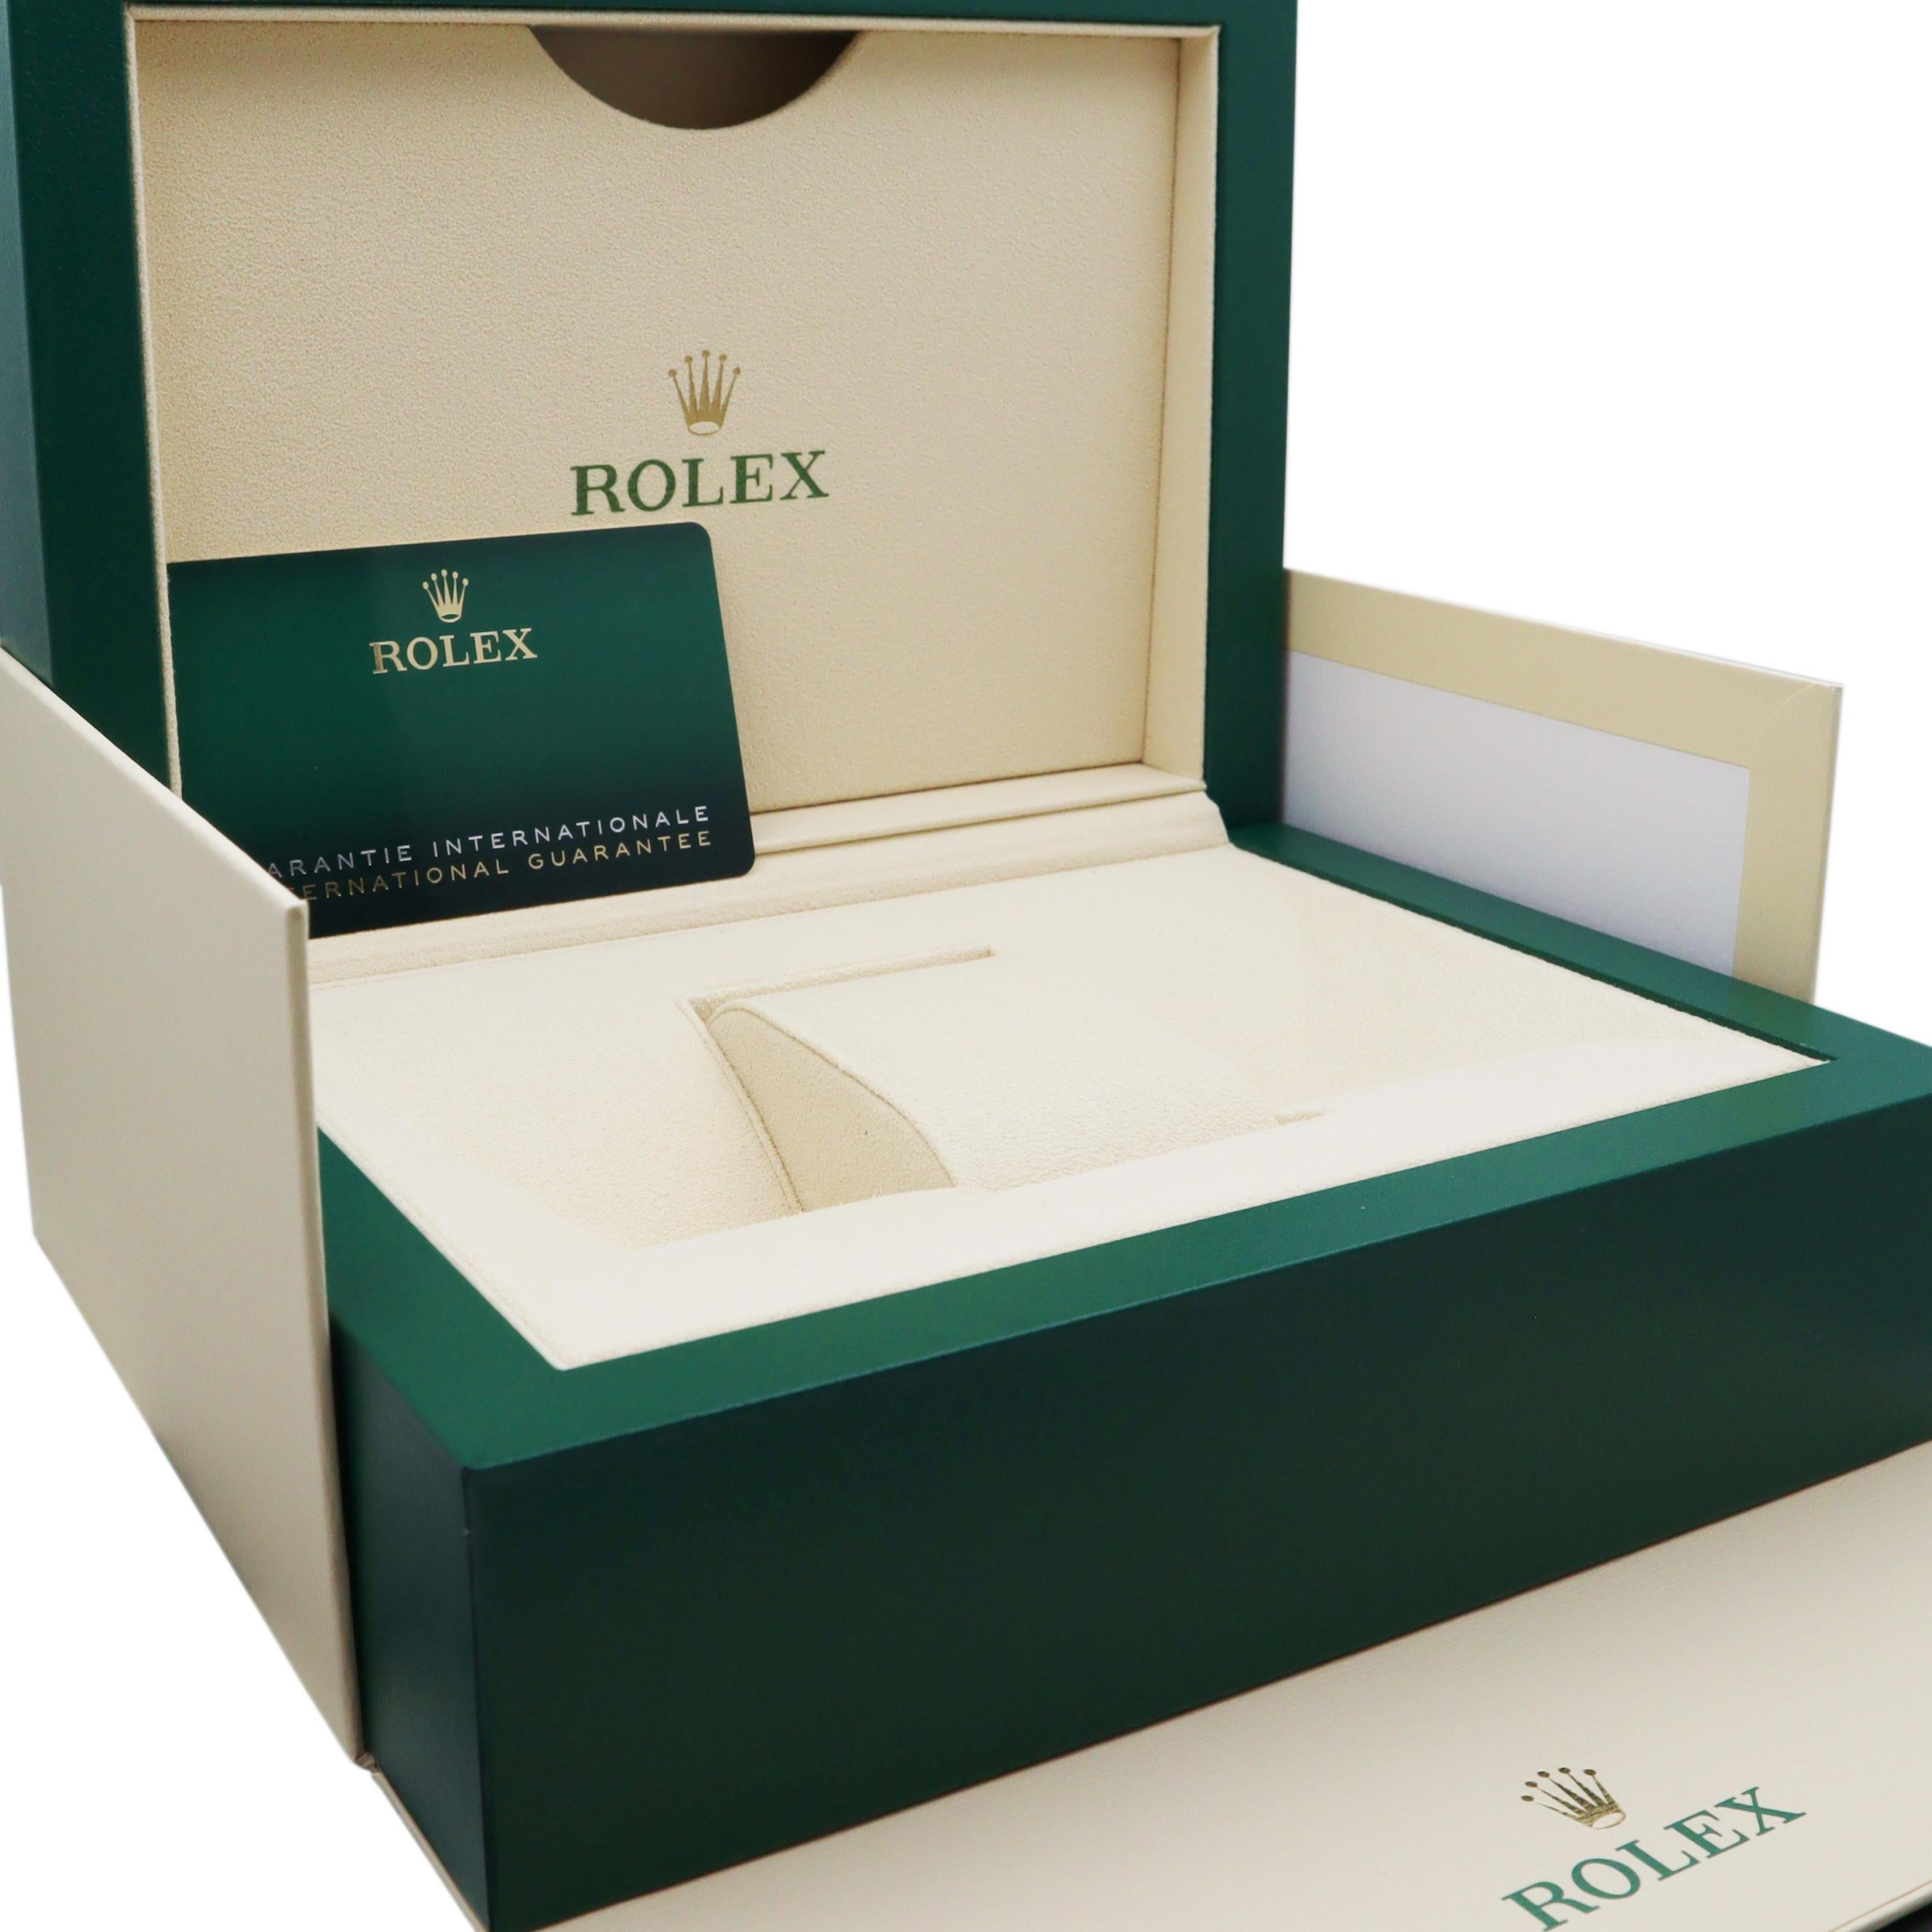 NEW Rolex Datejust 41 Steel & 18K White Gold Black Index Dial Mens Watch 126334 For Sale 1